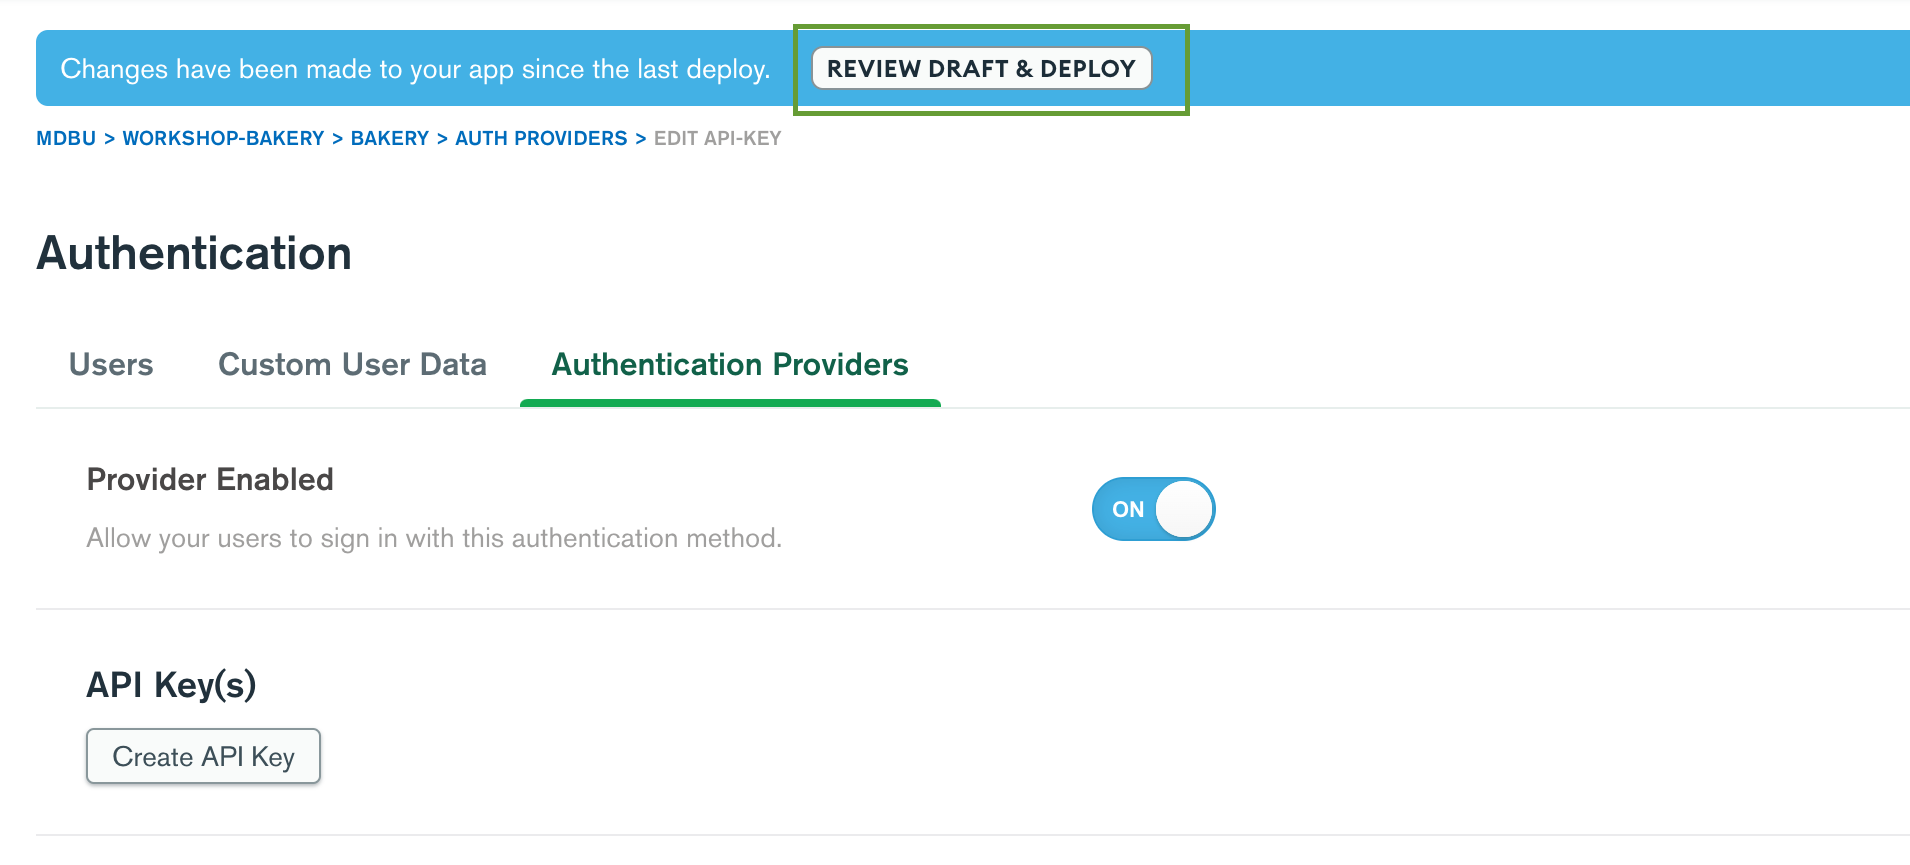 Review draft and deploy button